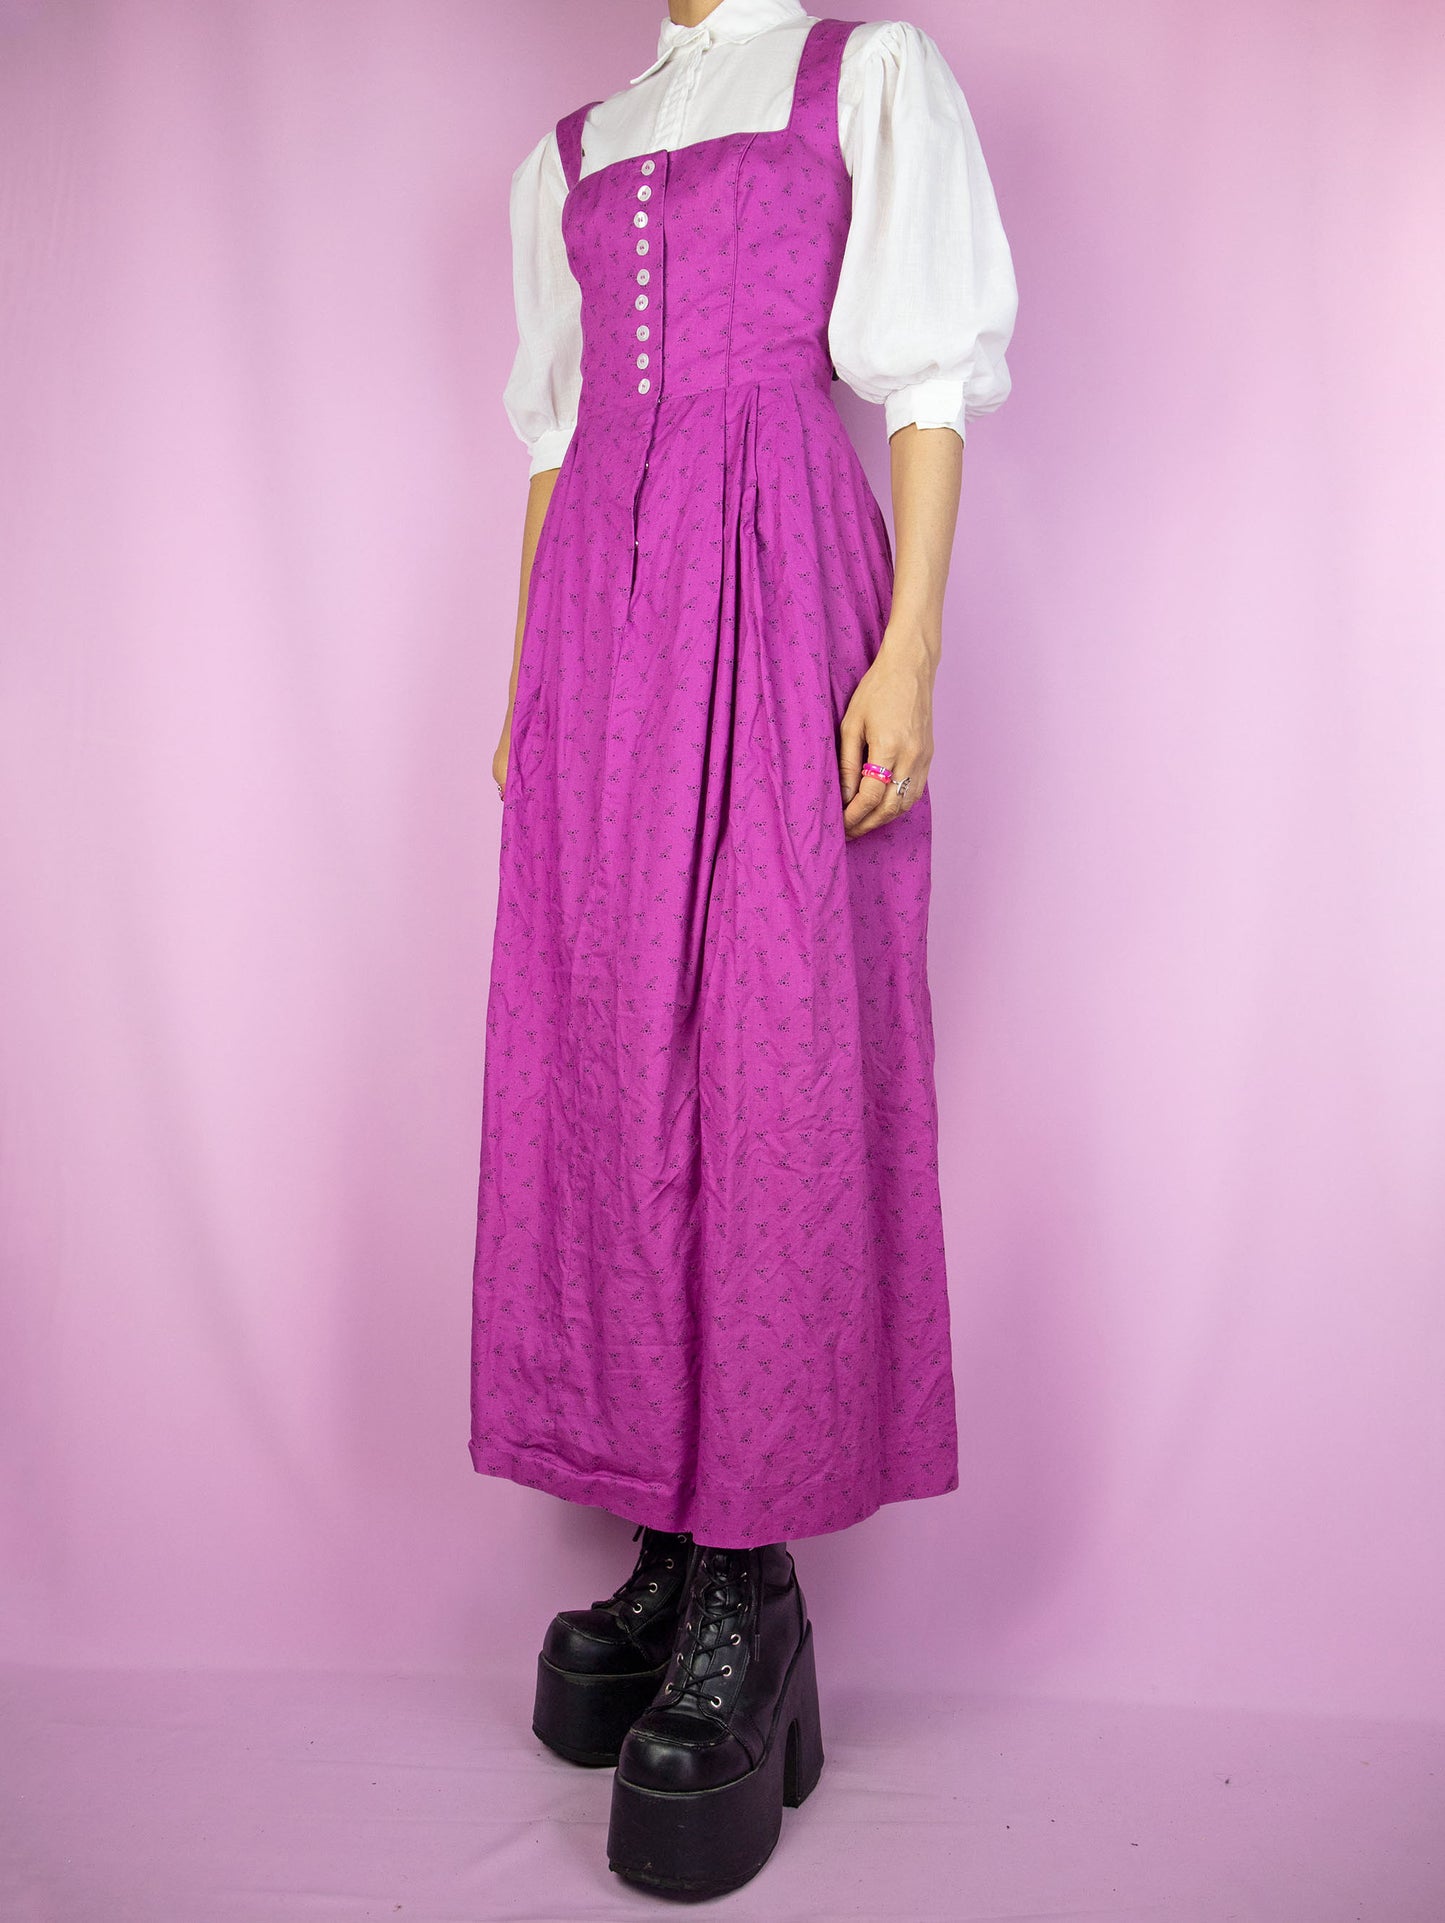 The Vintage 90s Purple Prairie Maxi Dress is a sleeveless floral dress with pleats and buttons. Boho country western cottage inspired 1990s midi dress. The white blouse shown underneath is not included.